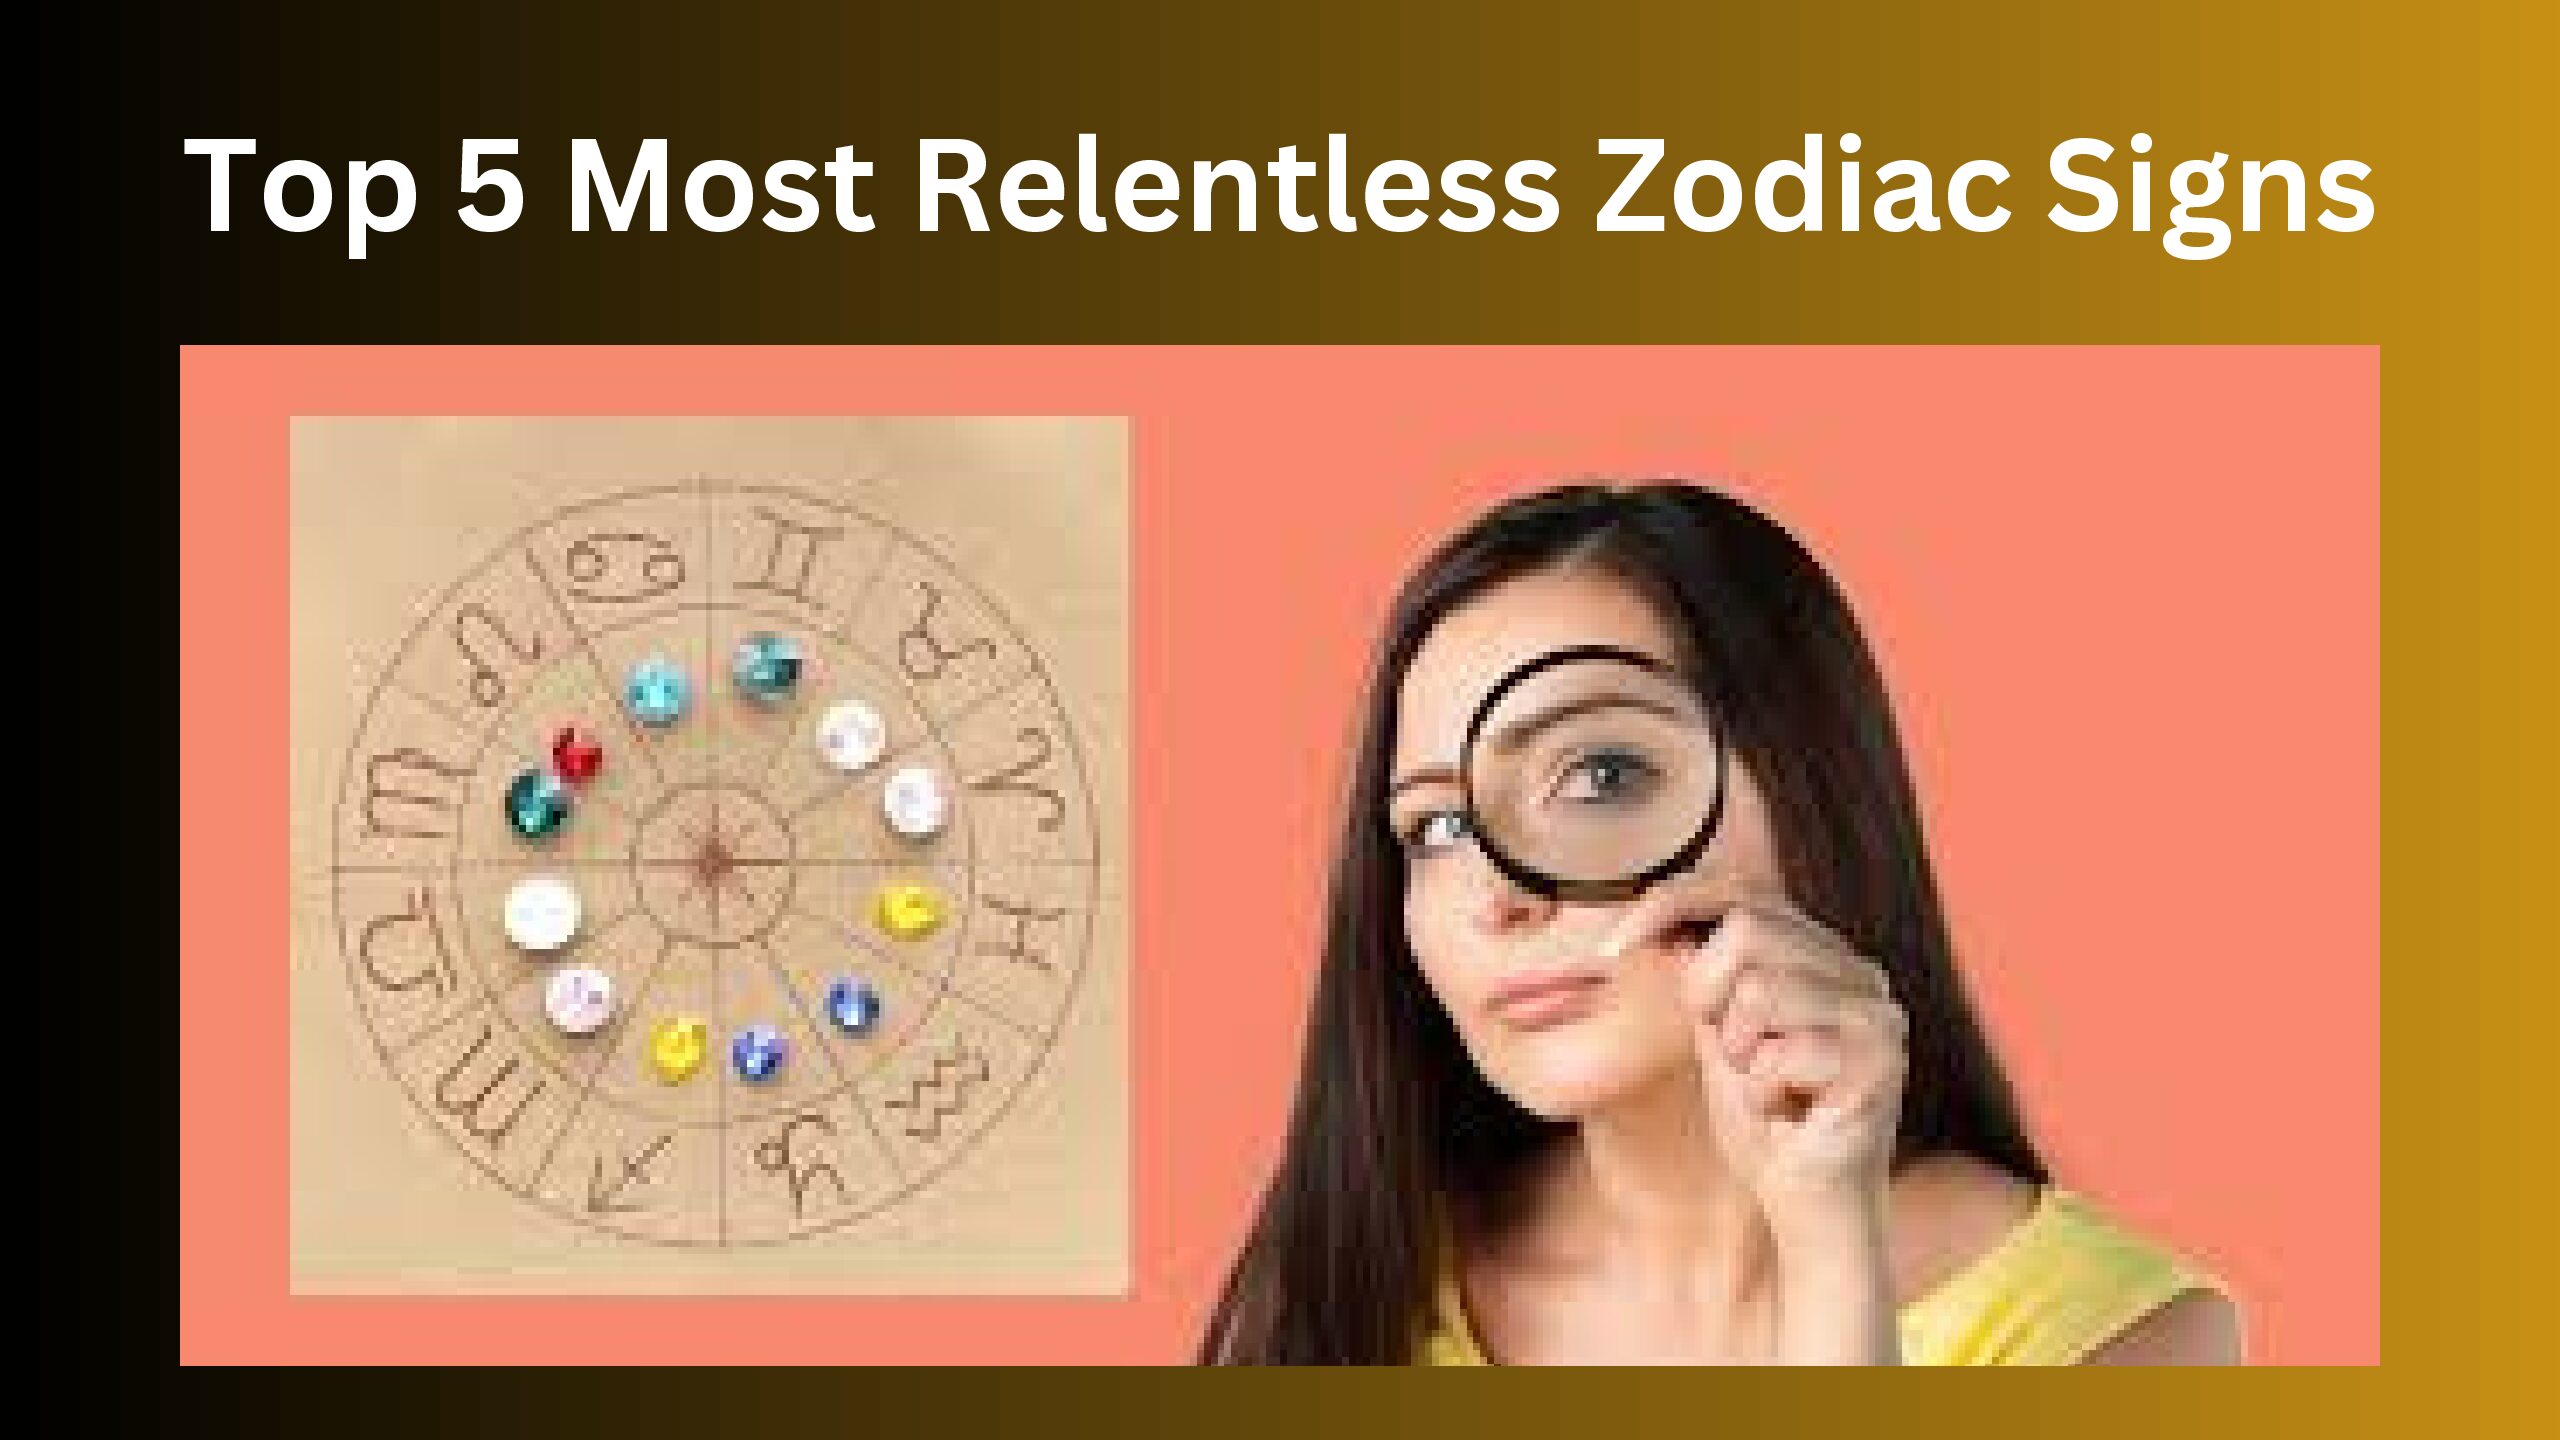 Top 5 Most Relentless Zodiac Signs: Find Out More Info!